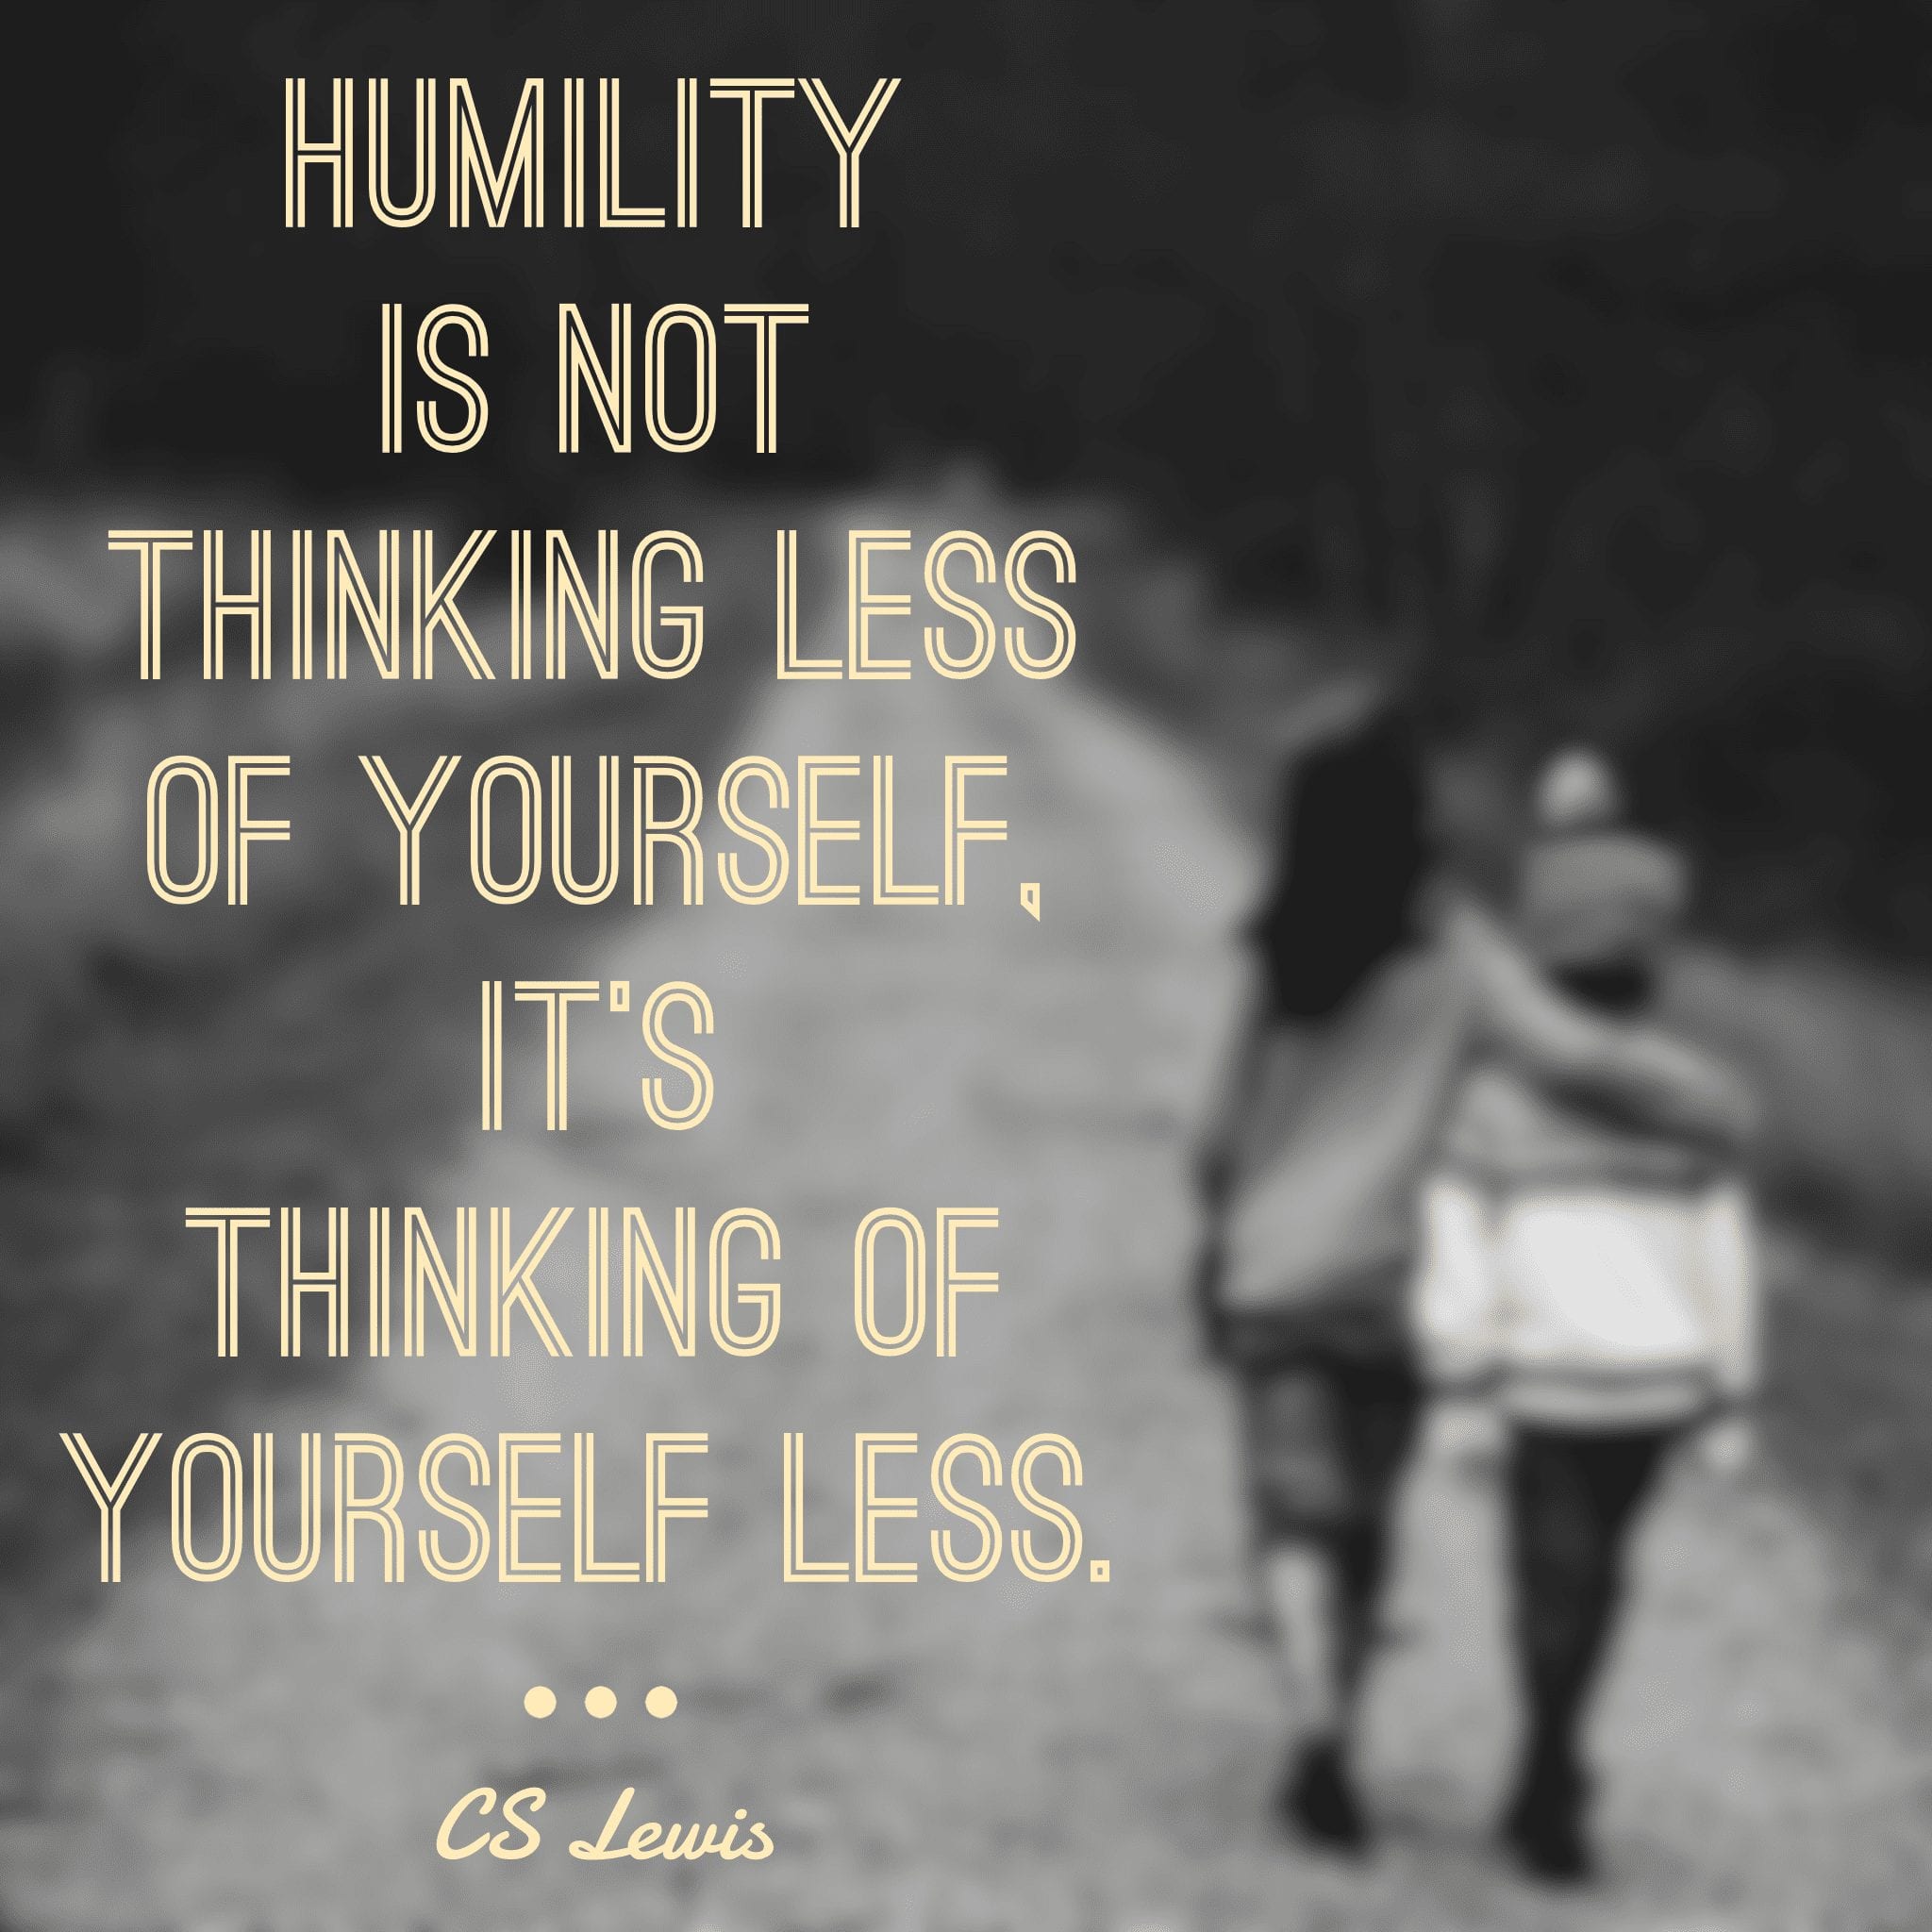 Why Should We Be Humble? 3 benefits of humility 1